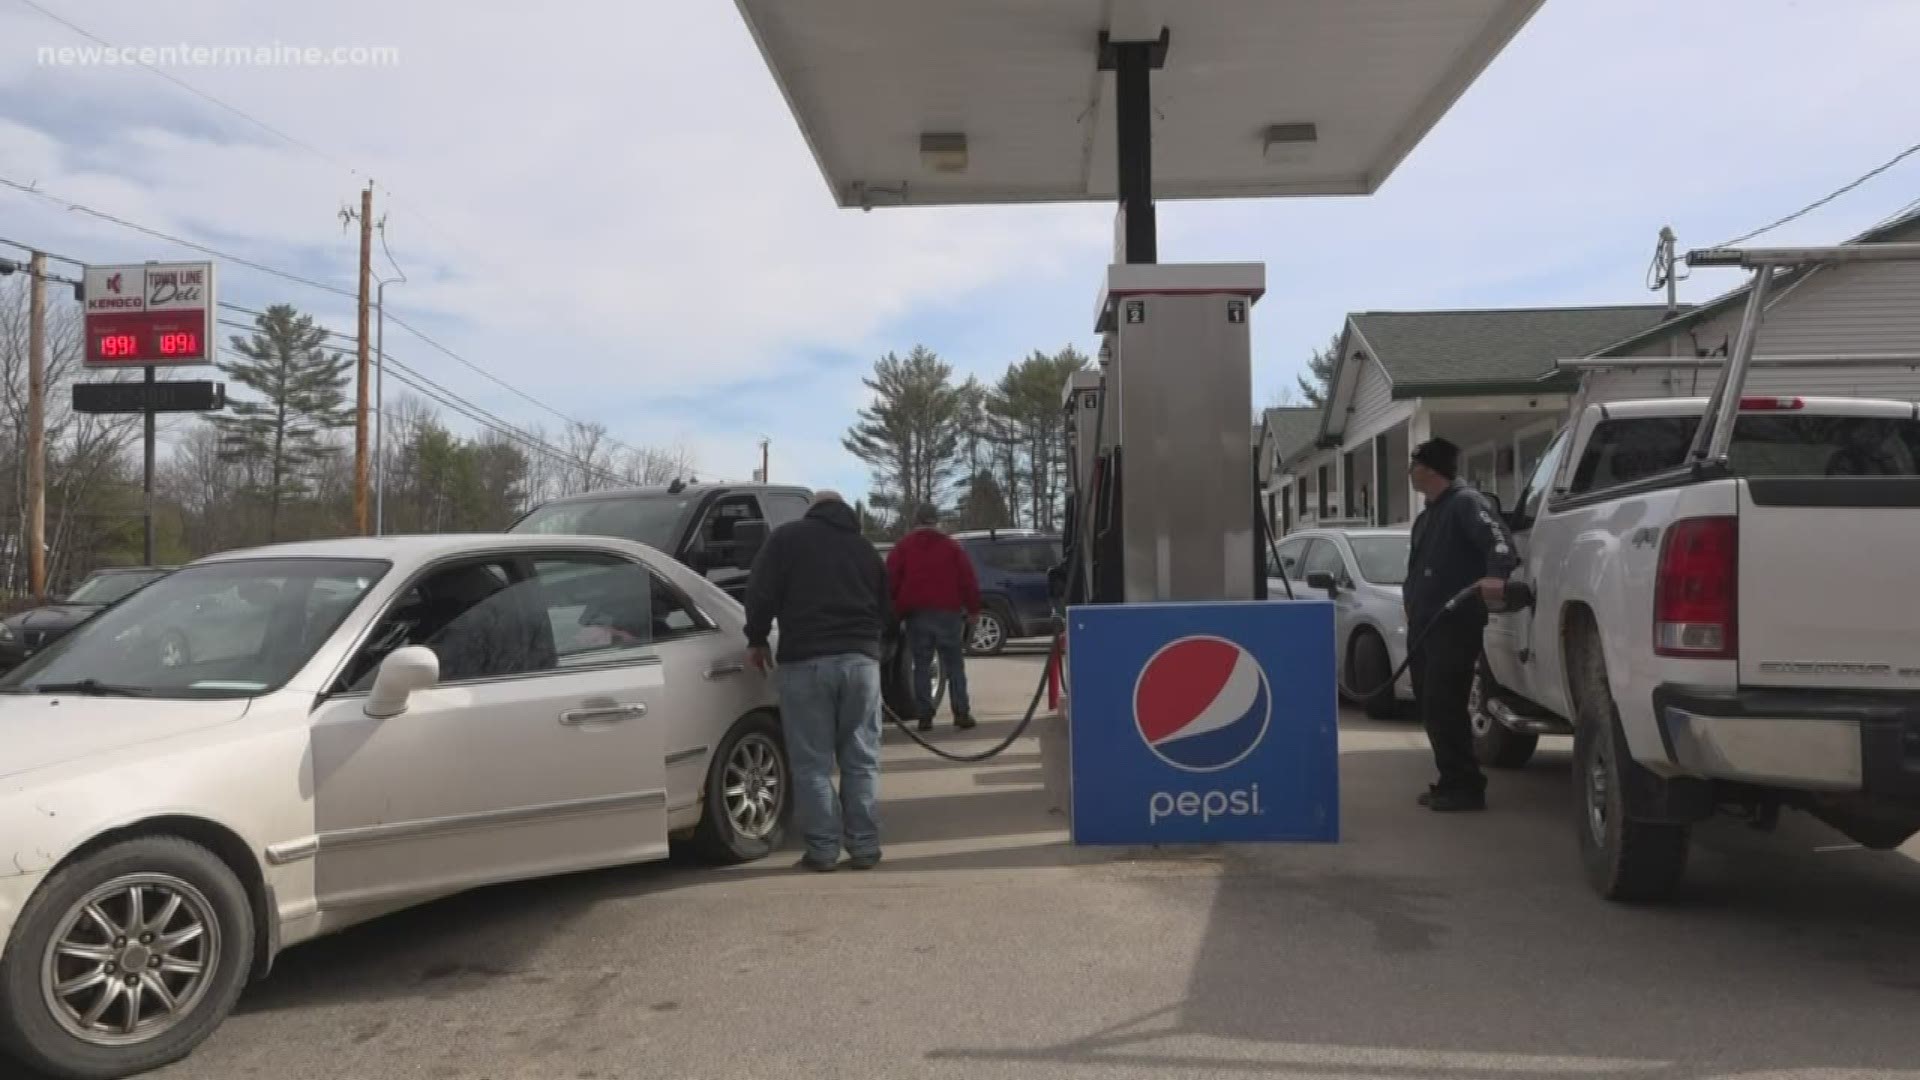 Cars lined up at the Town Line Deli in Waterboro Wednesday to fill up at $1.99 per gallon for regular gasoline.